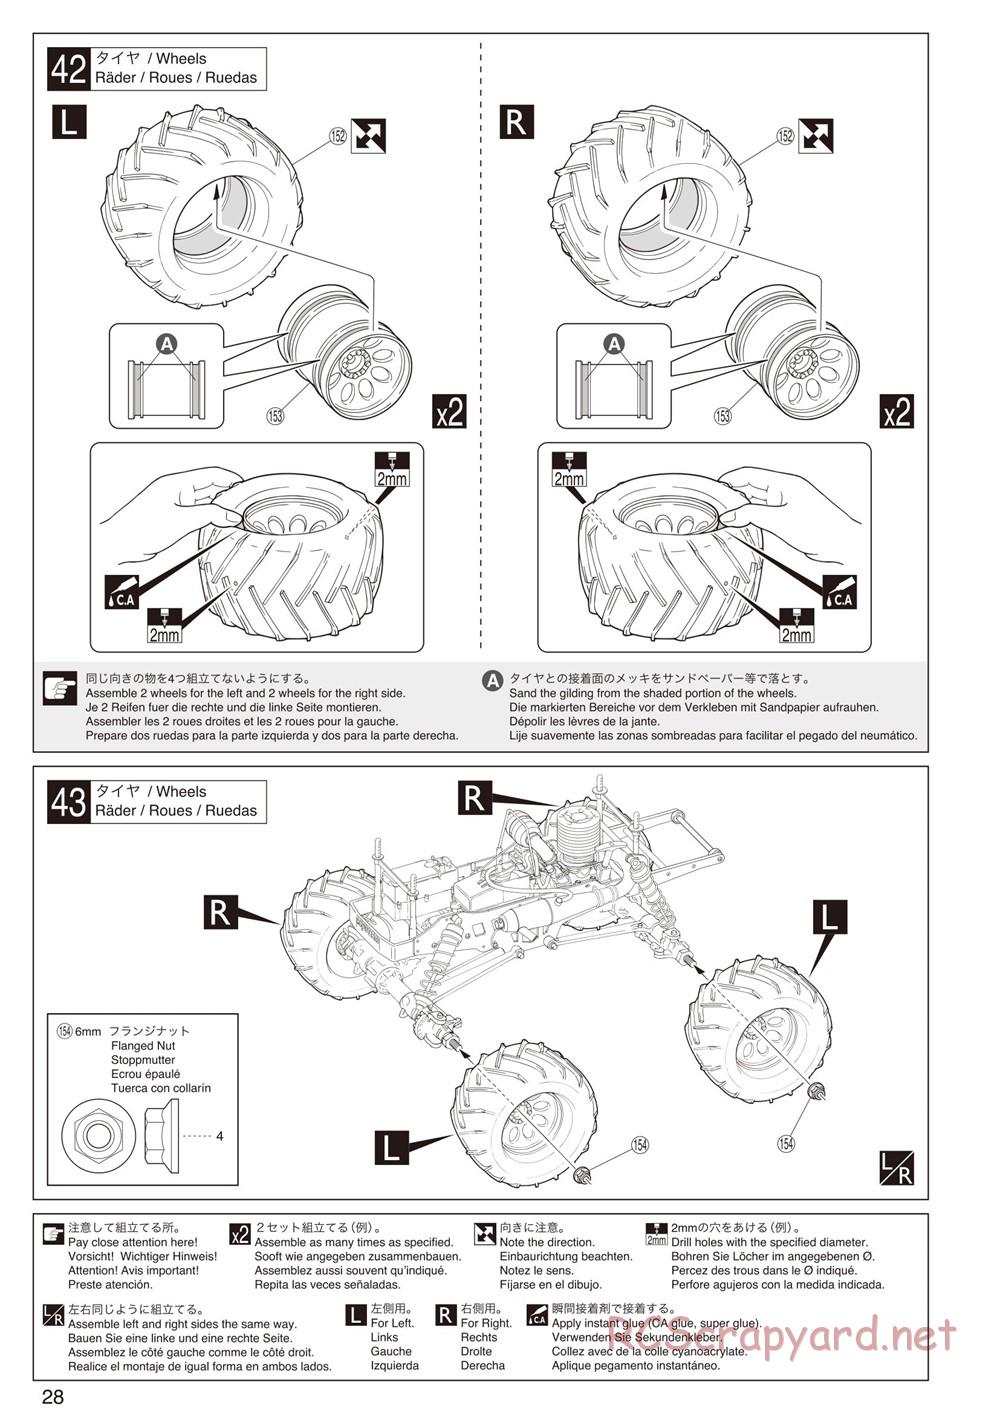 Kyosho - Mad Force Cruiser - Manual - Page 28